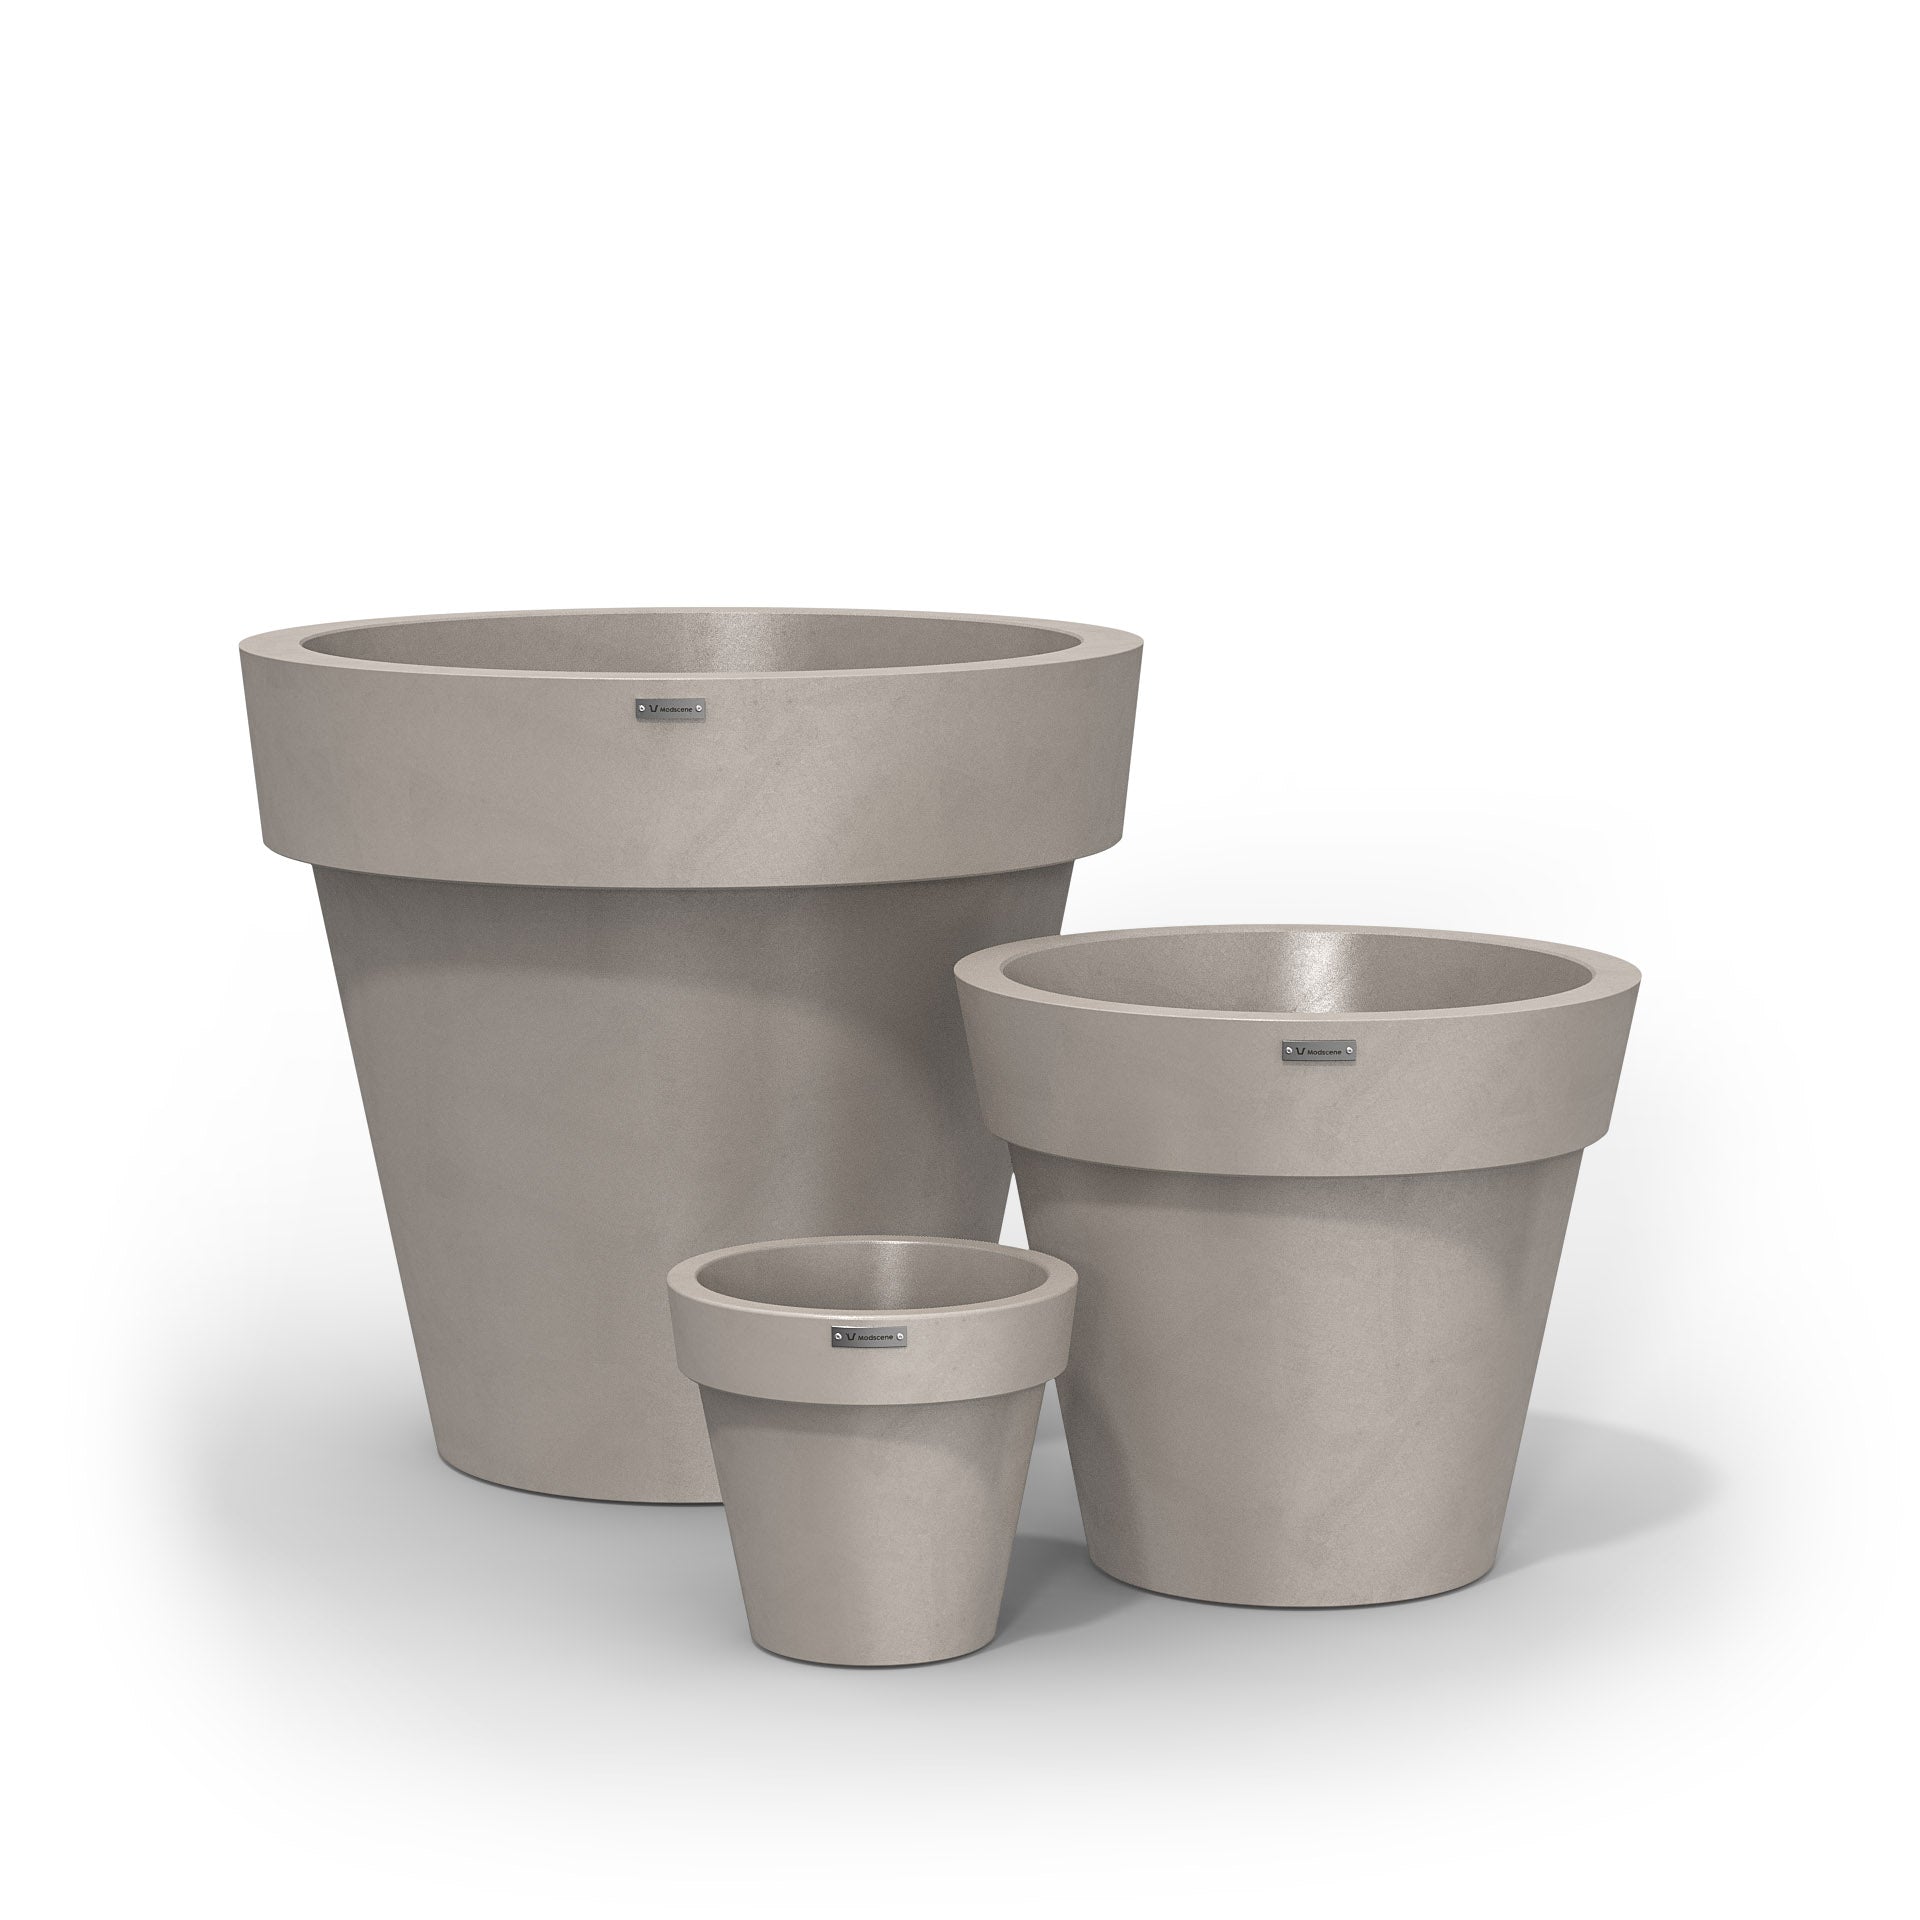 A cluster of three Modscene planters pots in a sandstone colour with a concrete look.